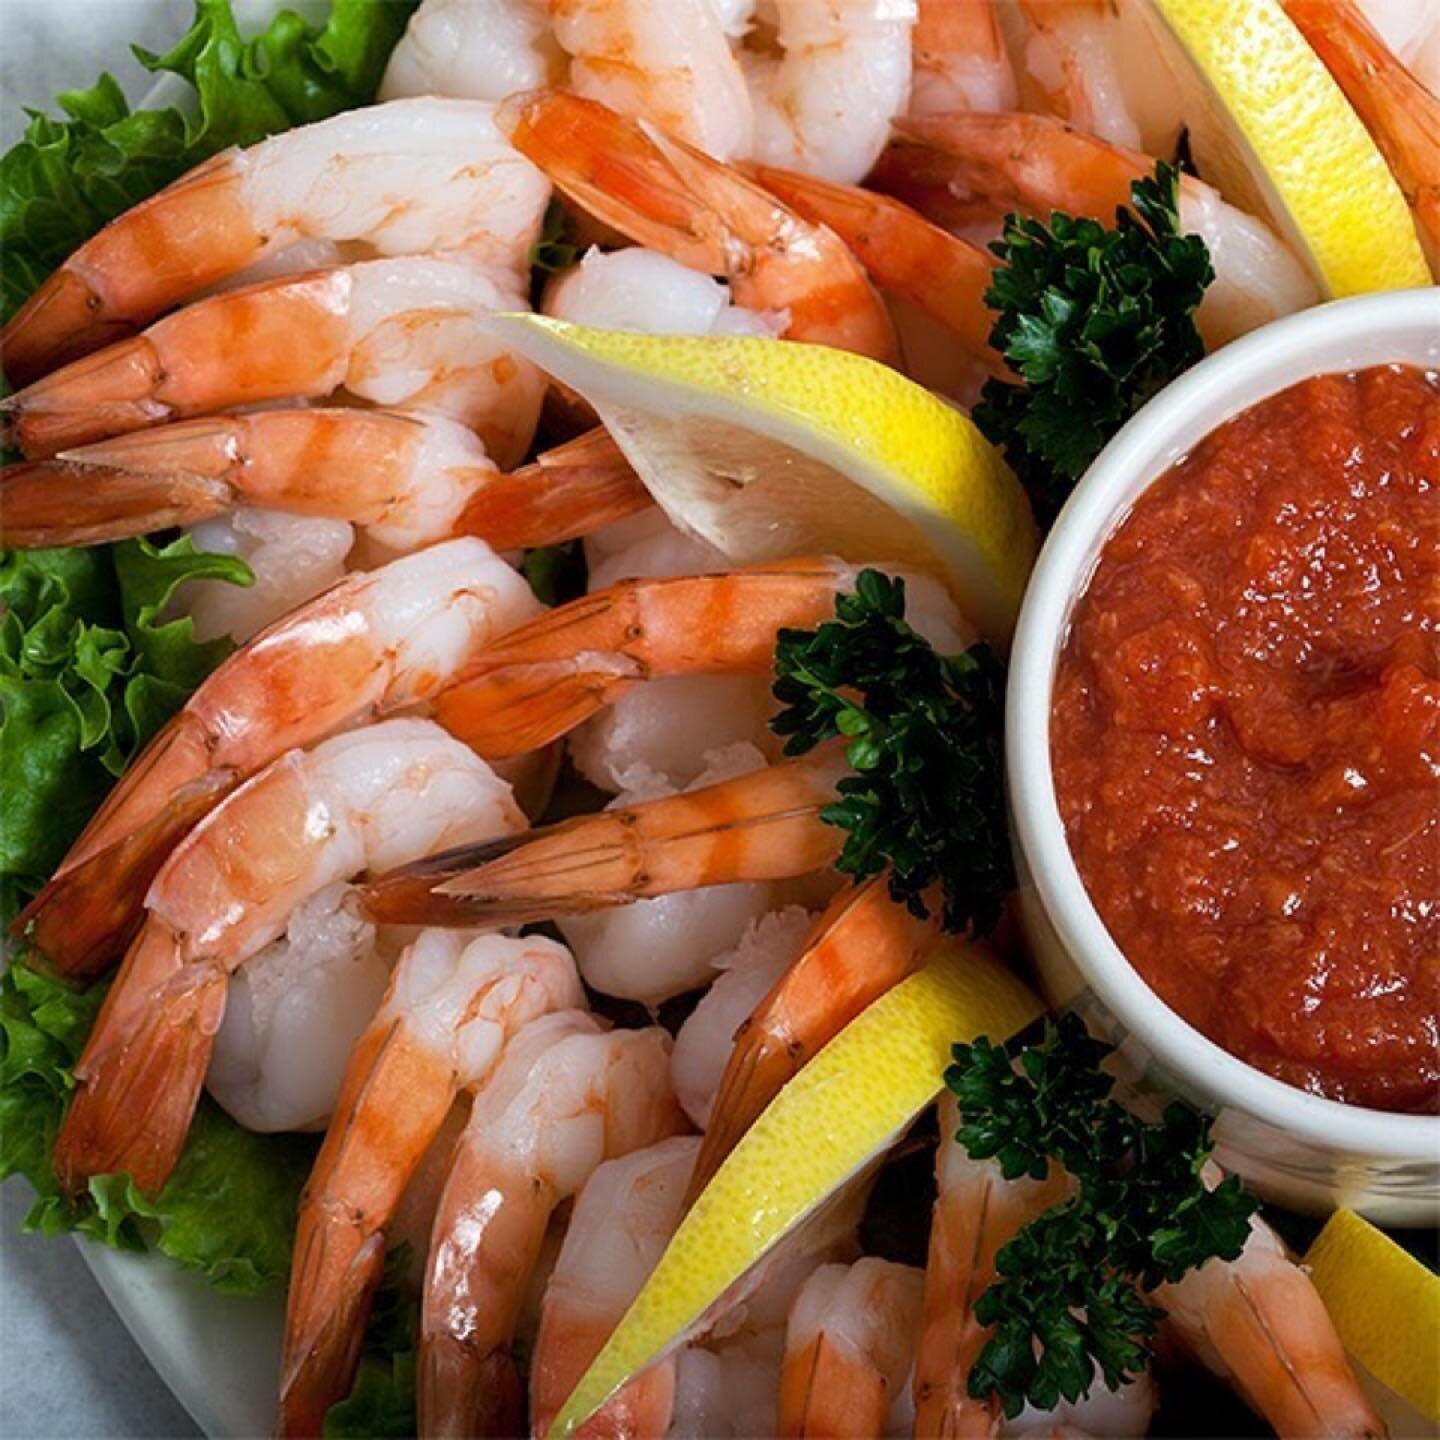 Still don&rsquo;t know what to bring to Thanksgiving? We&rsquo;ve got an idea&hellip; 🦐
.
Better than store bought, (no random frozen pieces), these shrimp platters are fresh, clean and super flavorful! Order today online or by giving us a call. 609